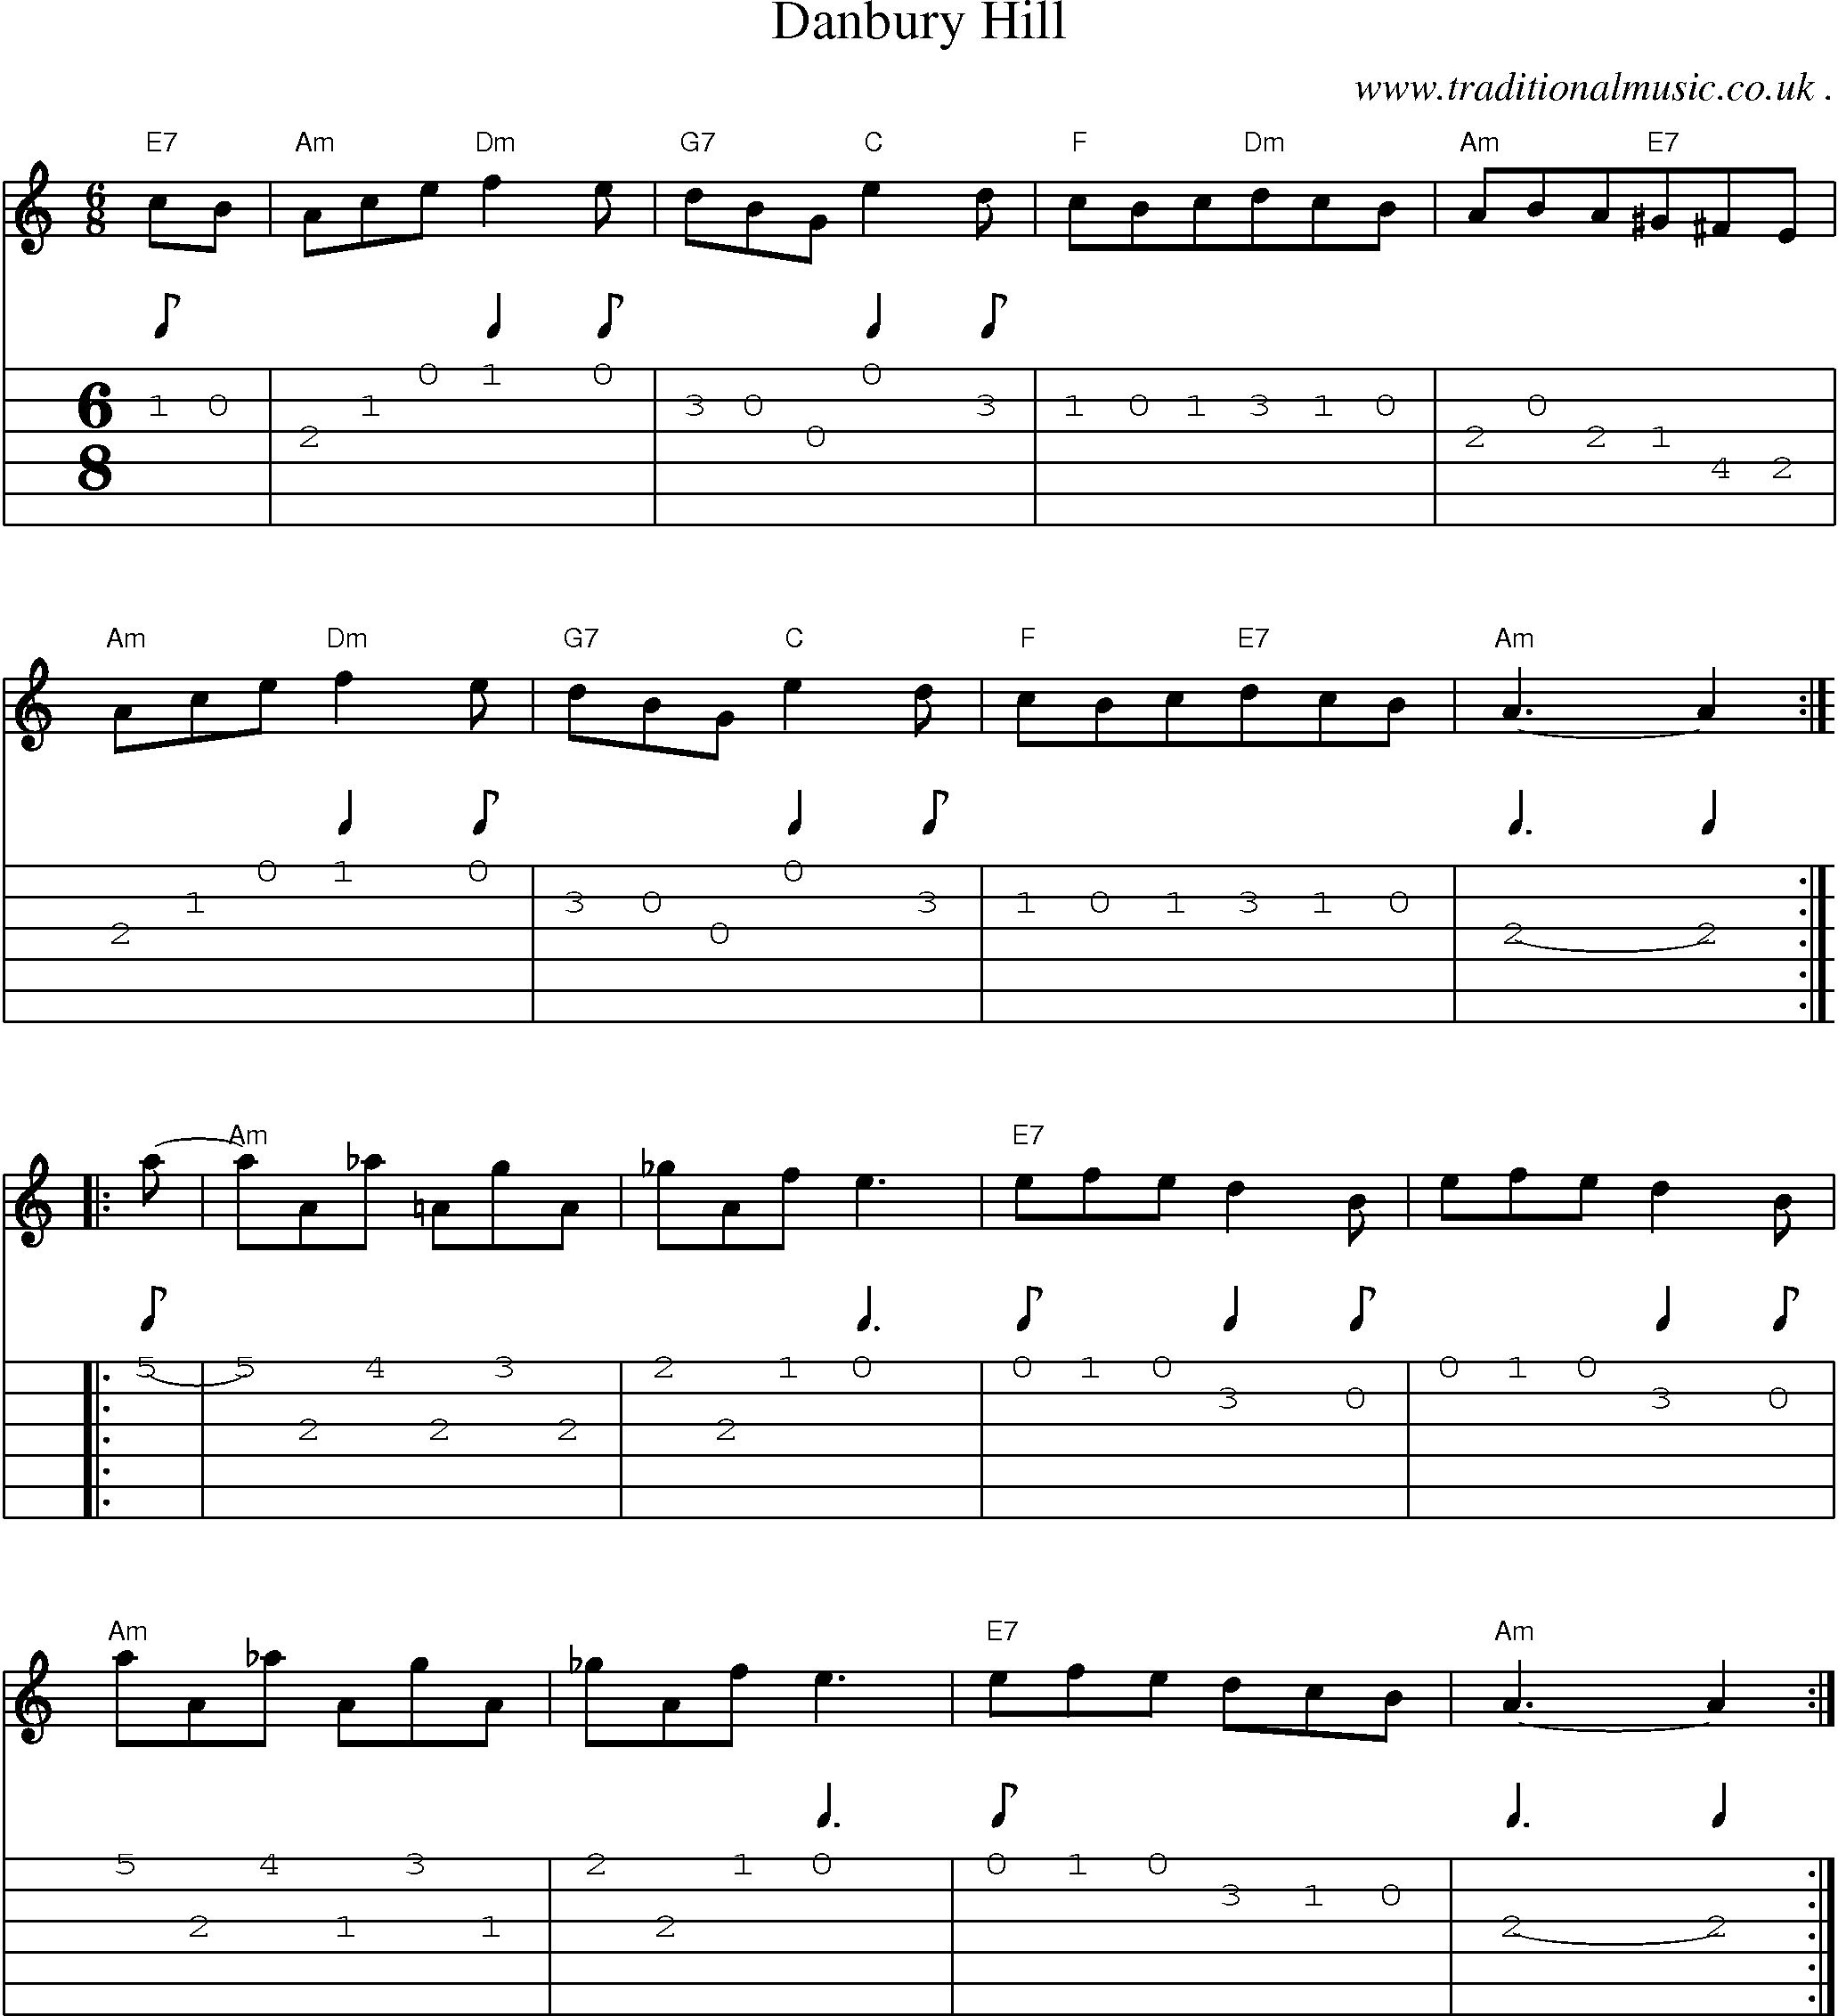 Sheet-Music and Guitar Tabs for Danbury Hill